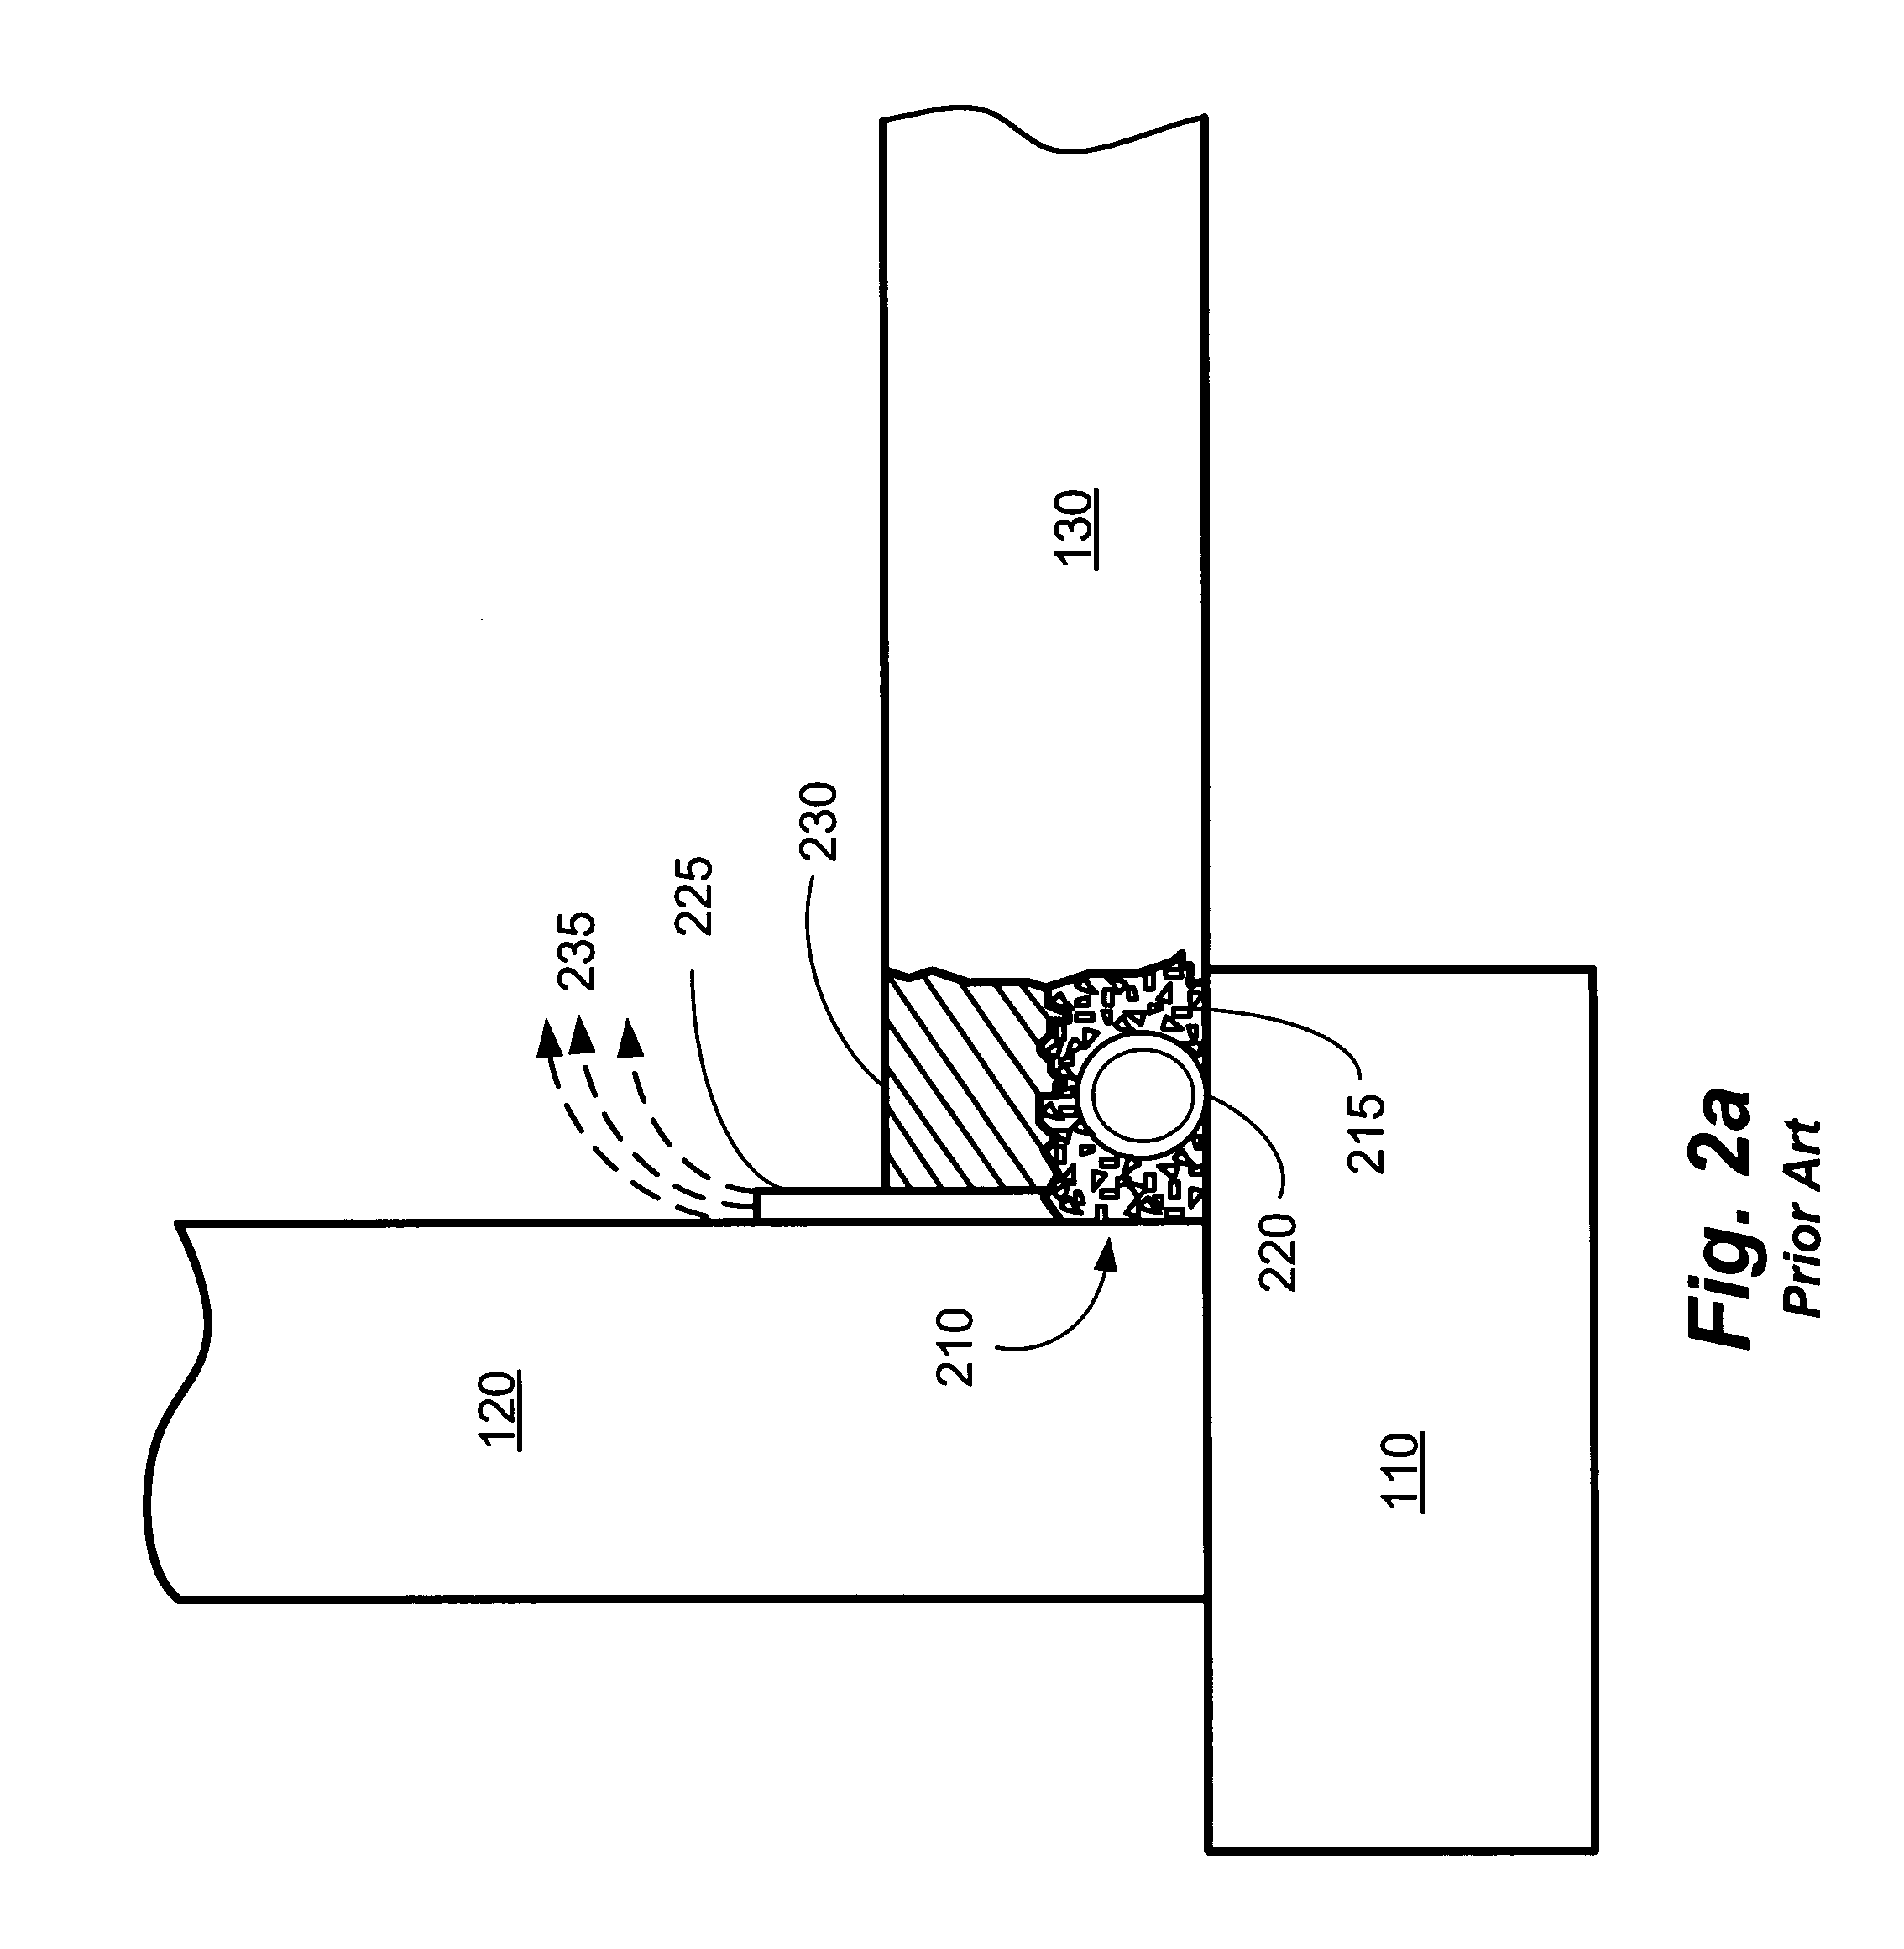 System and methods for providing a waterproofing form for structural waterproofing